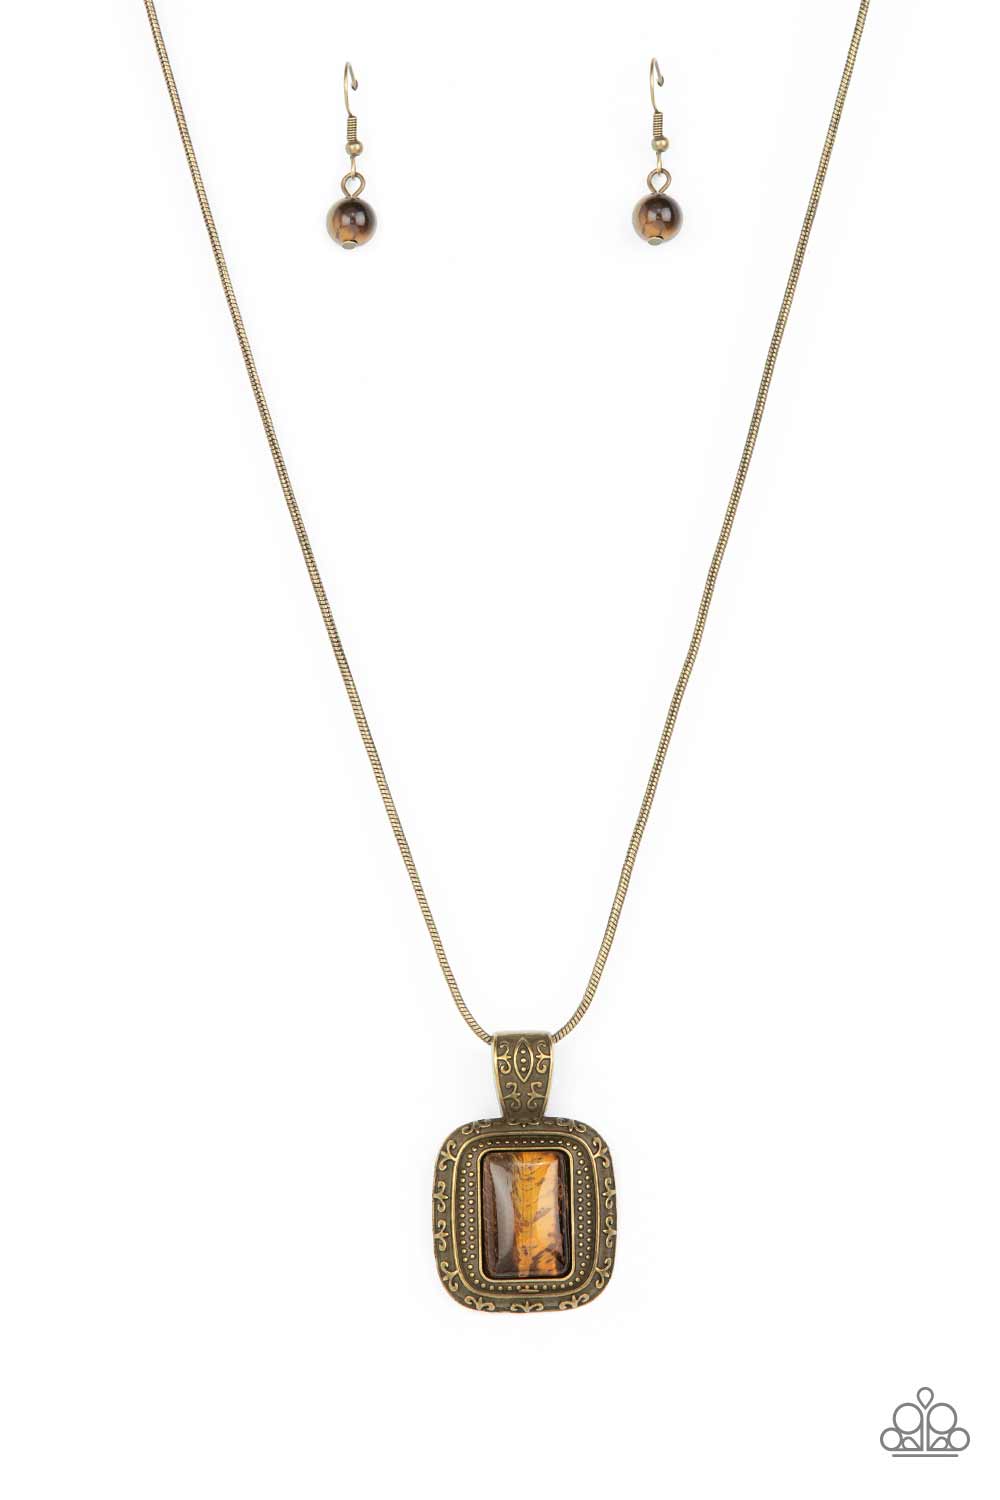 Right Hand TALISMAN - Brass Tiger Eye Necklace - Paparazzi Accessories - A rectangular tiger's eye stone is pressed into the center of a studded brass frame bordered in decorative filigree at the bottom of a rounded brass snake chain, creating a mystical talisman below the collar.